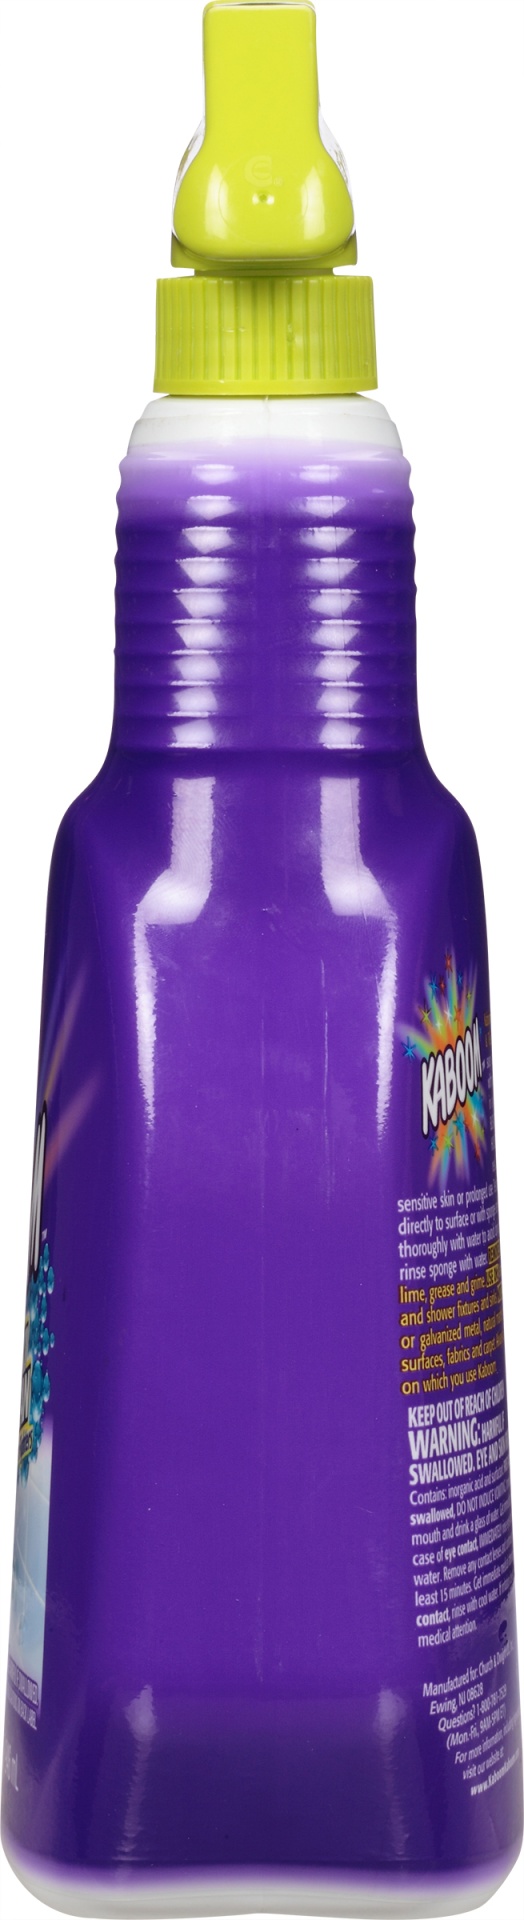 slide 6 of 6, Kaboom With OxiClean Shower Tub Tile Cleaner, 32 oz